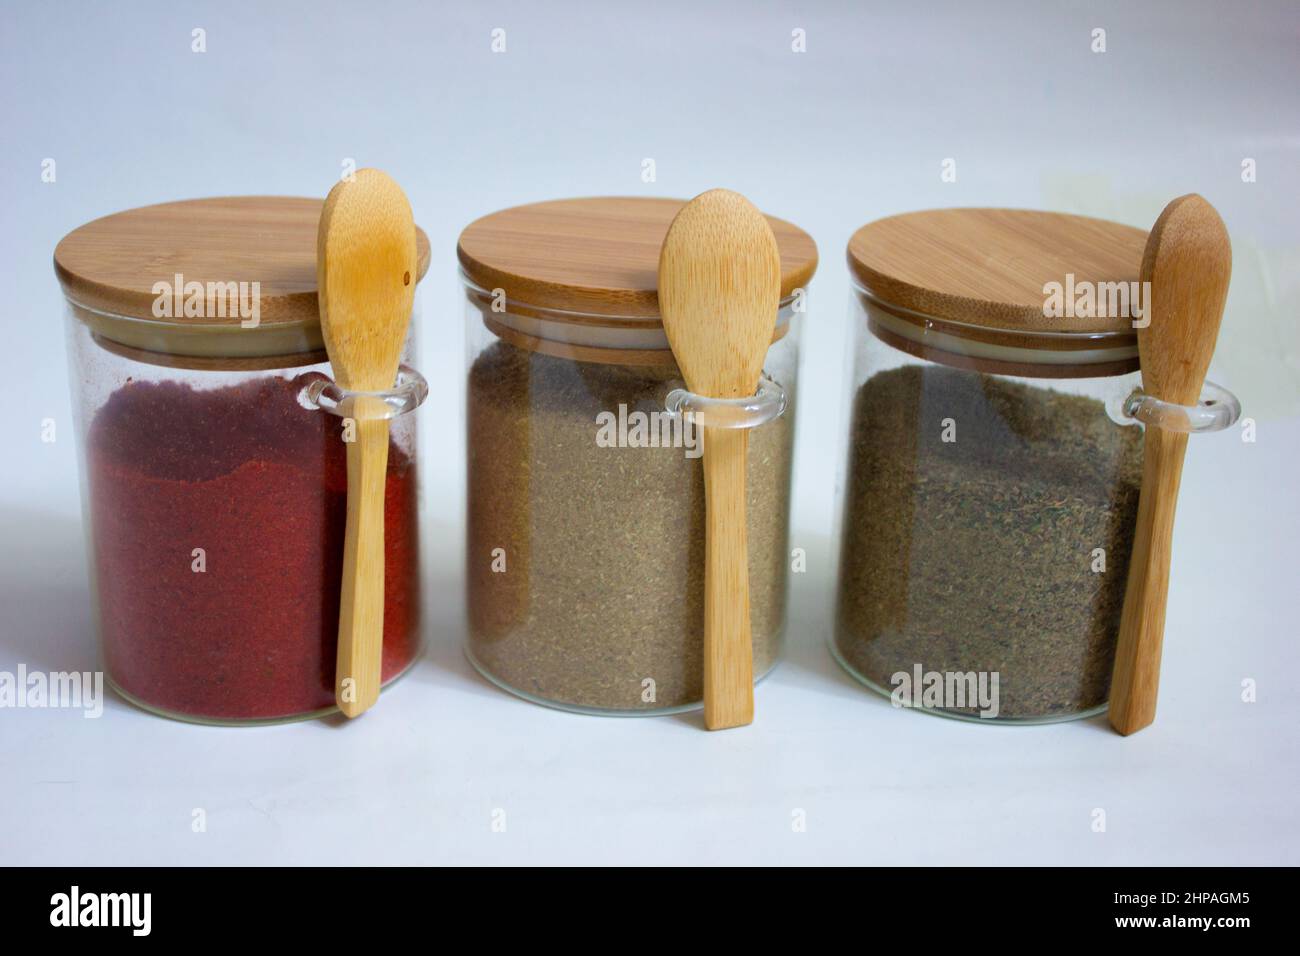 https://c8.alamy.com/comp/2HPAGM5/jars-for-storing-spices-on-a-white-background-2HPAGM5.jpg